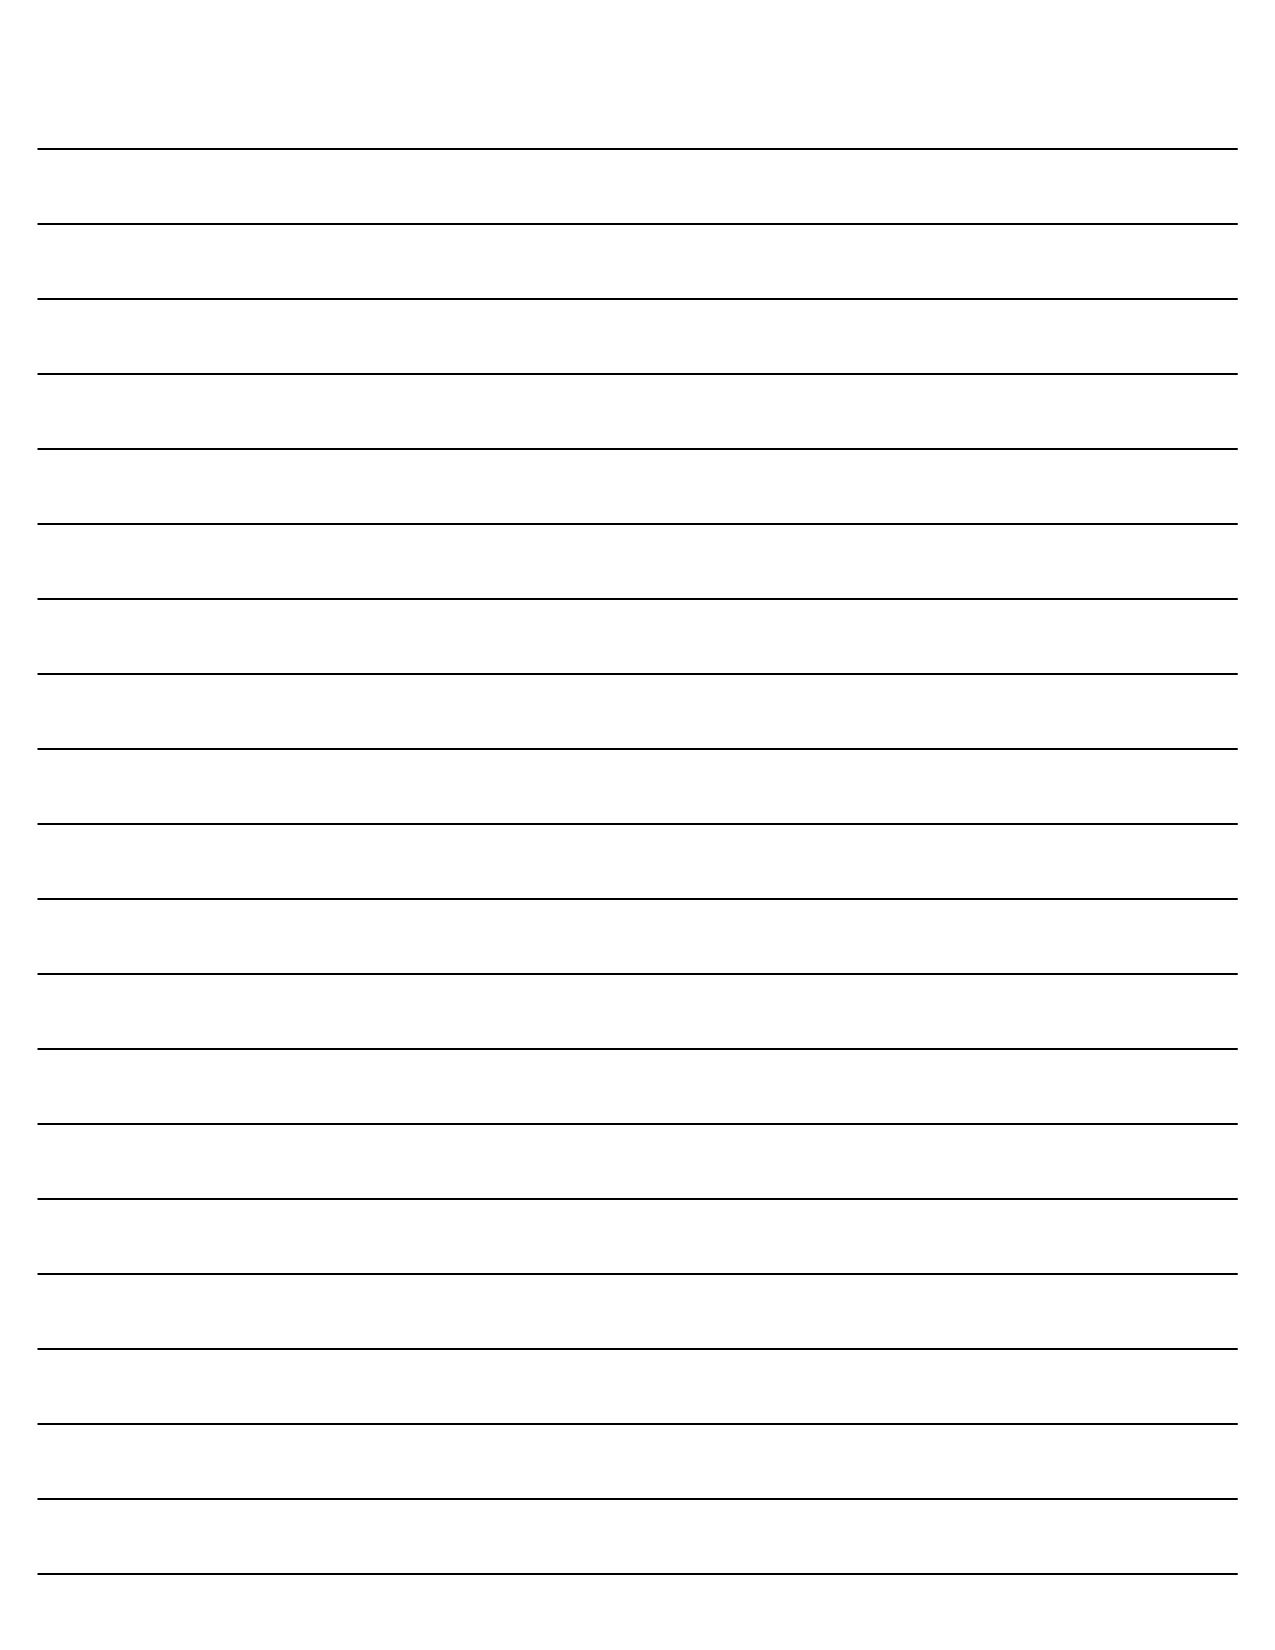 Free Printable Lined Writing Paper Template | Printables | Lined - Free Printable Lined Writing Paper